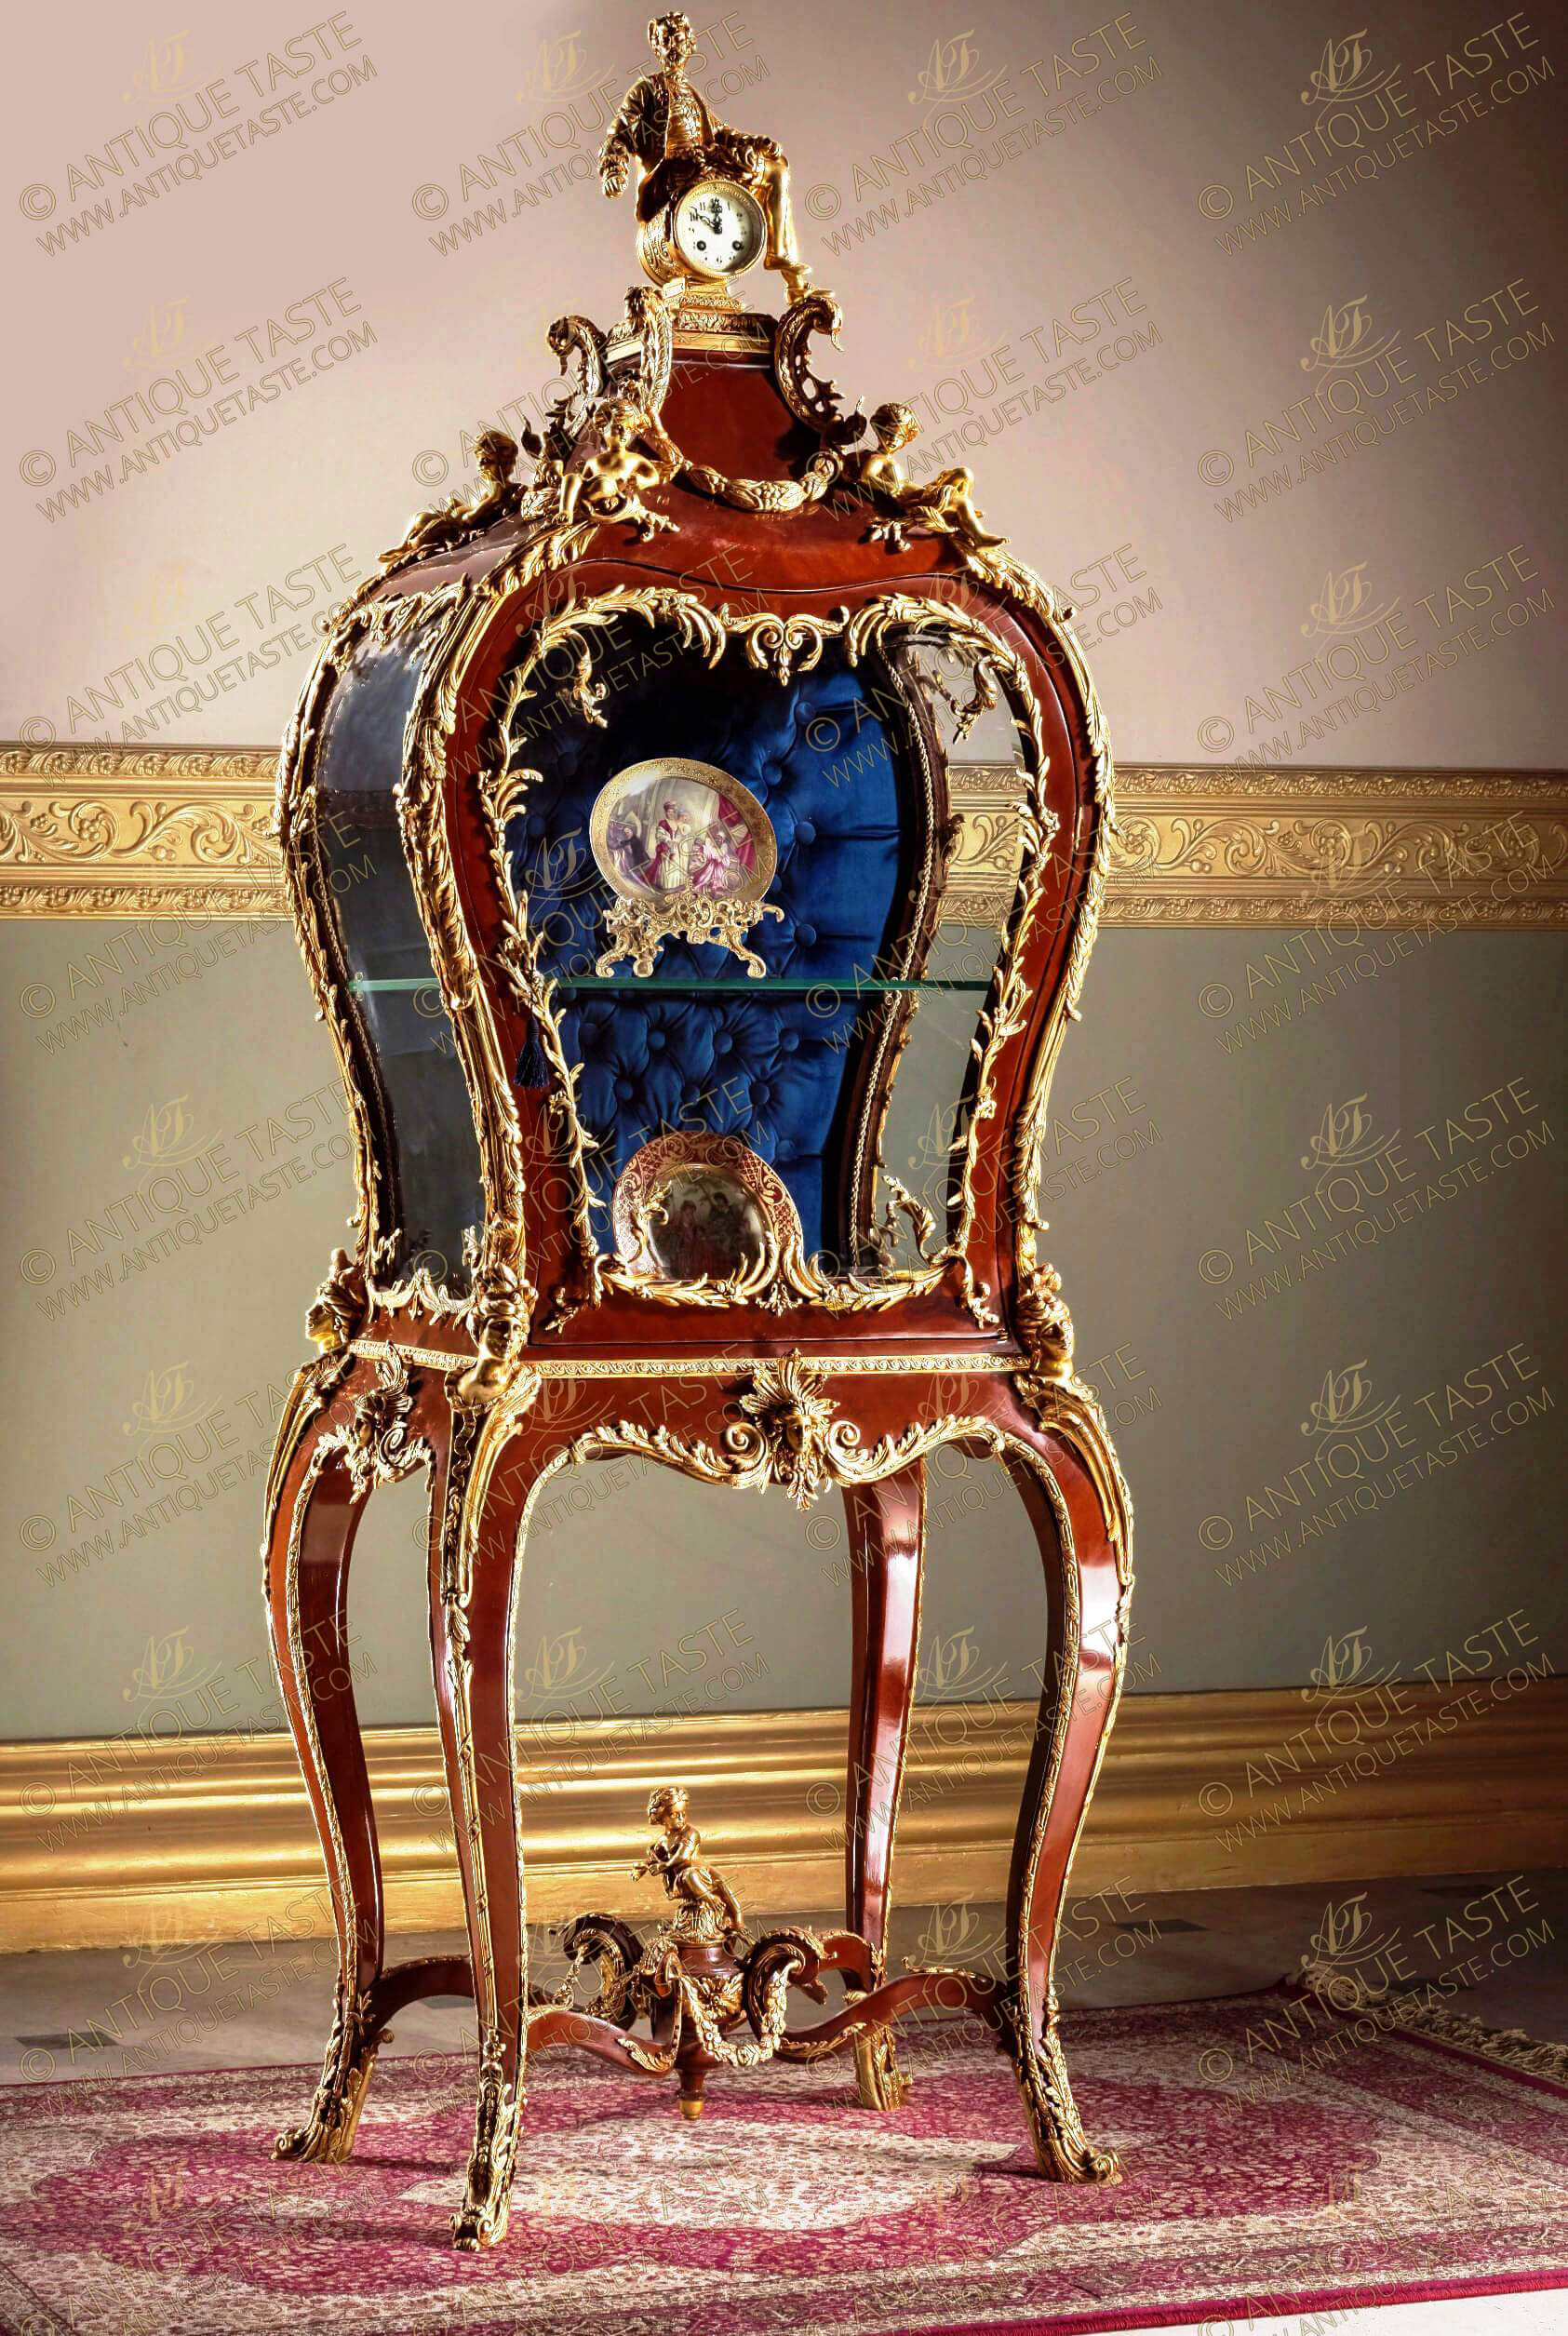 Furniture XV Display French Reproductions style Corner Louis Louis Vitrine, XVI Cabinet,